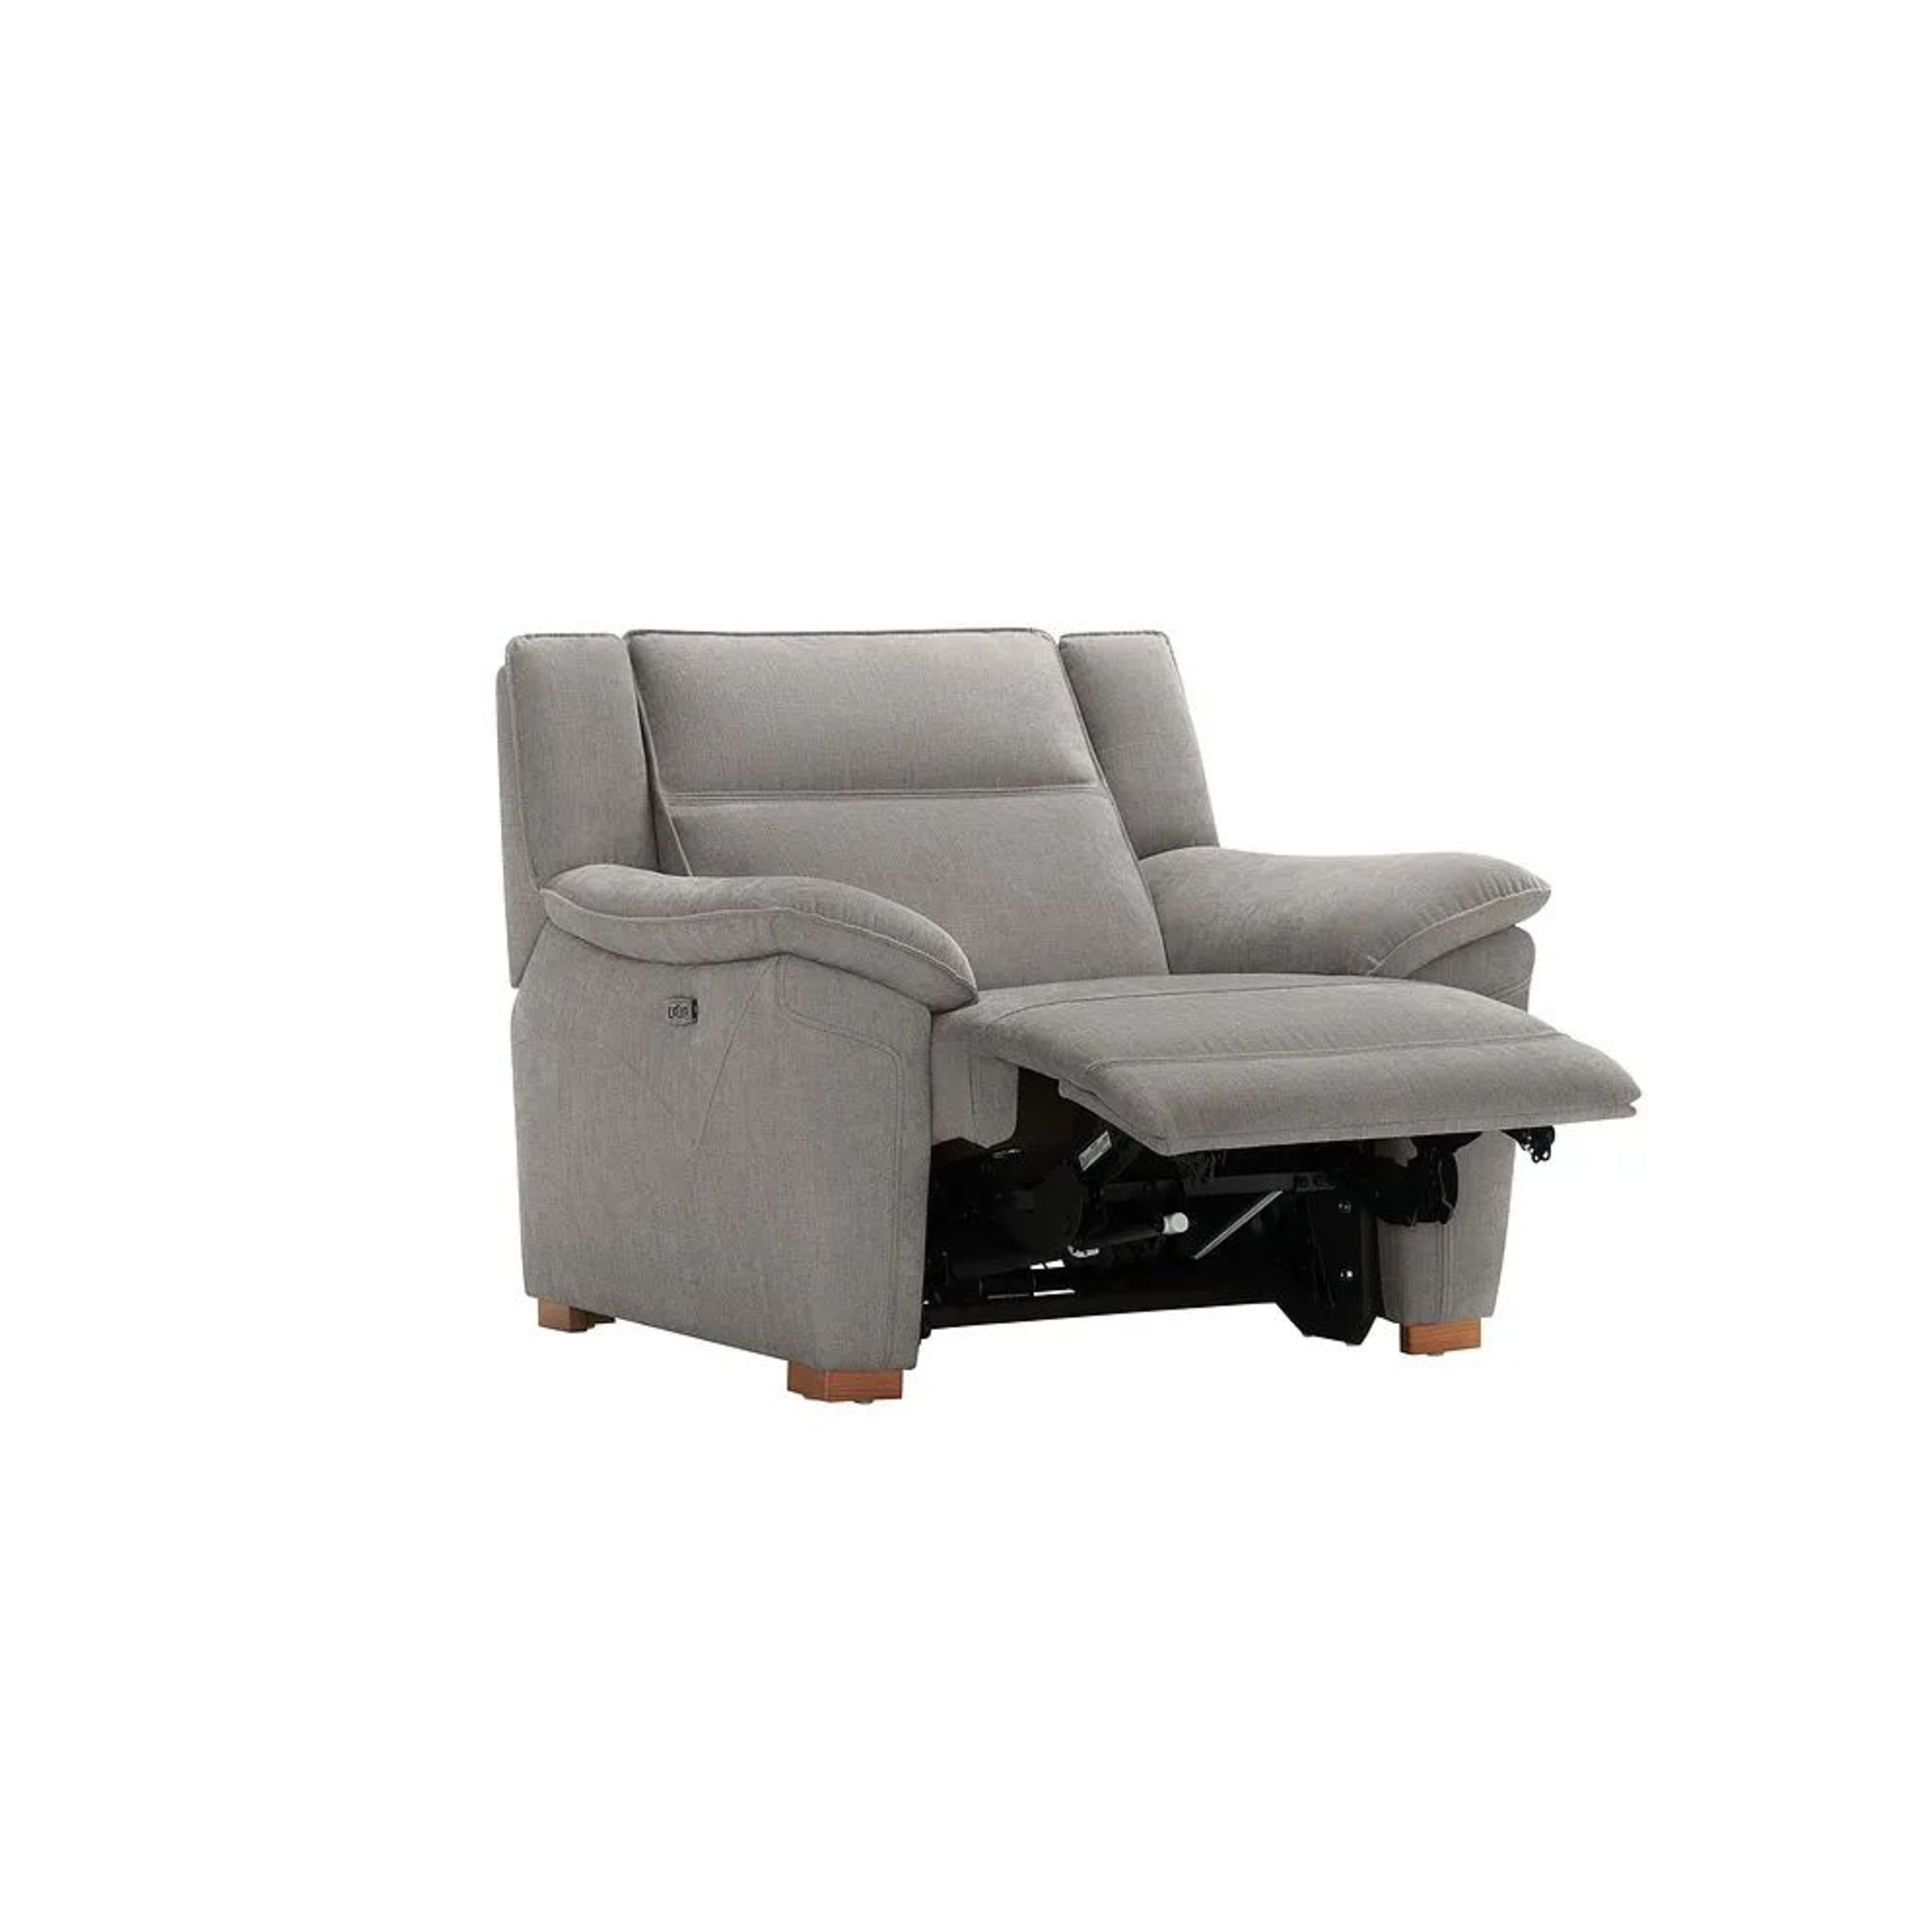 BRAND NEW DUNE Electric Recliner Armchair with Power Headrest - AMIGO GRANITE FABRIC. RRP £1099. - Image 5 of 12